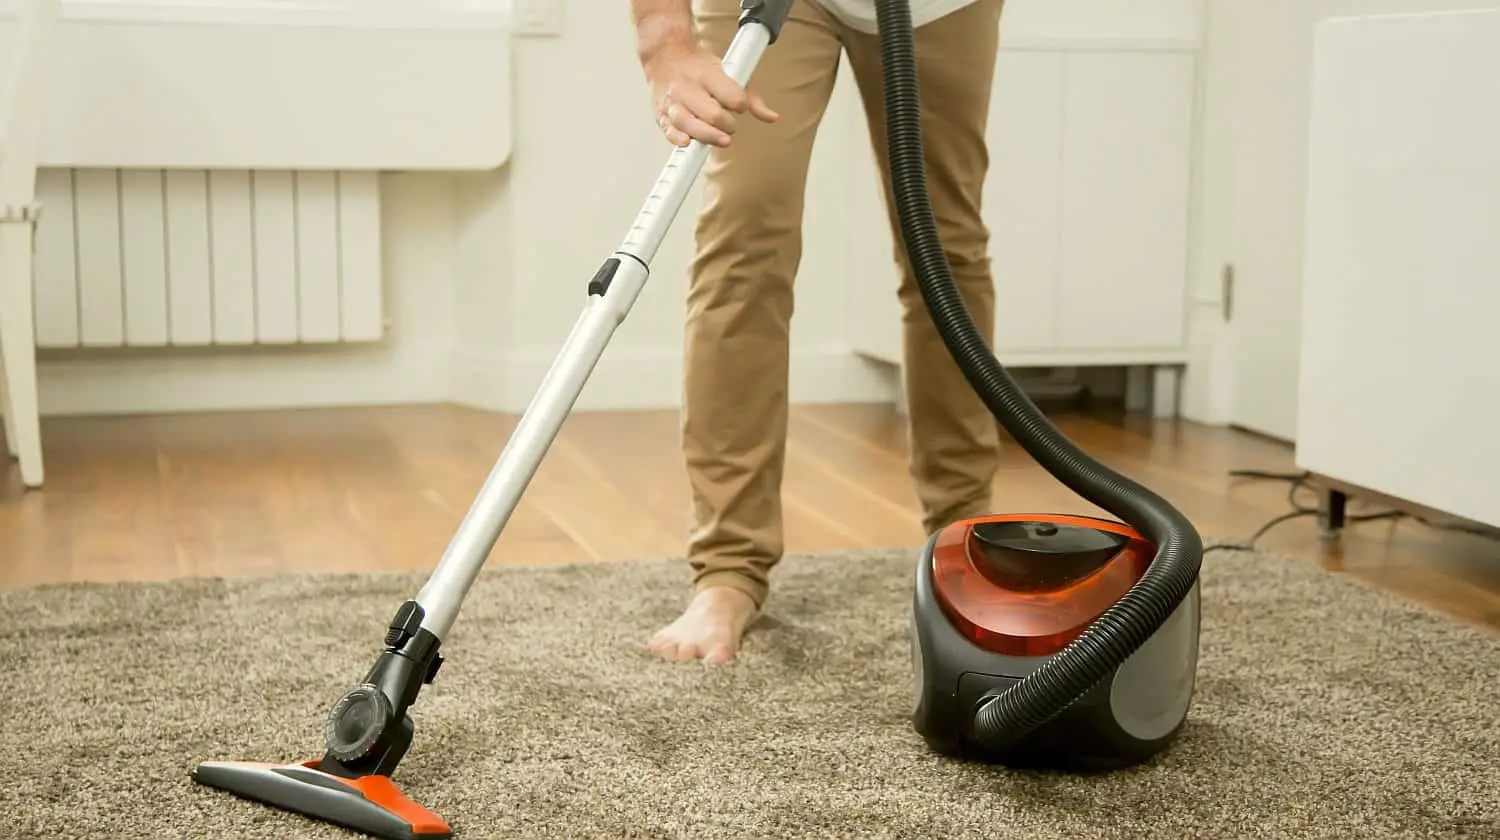 Man Vacuum cleaning the carpet | Top Gadgets To Speed Up Your Spring Cleaning